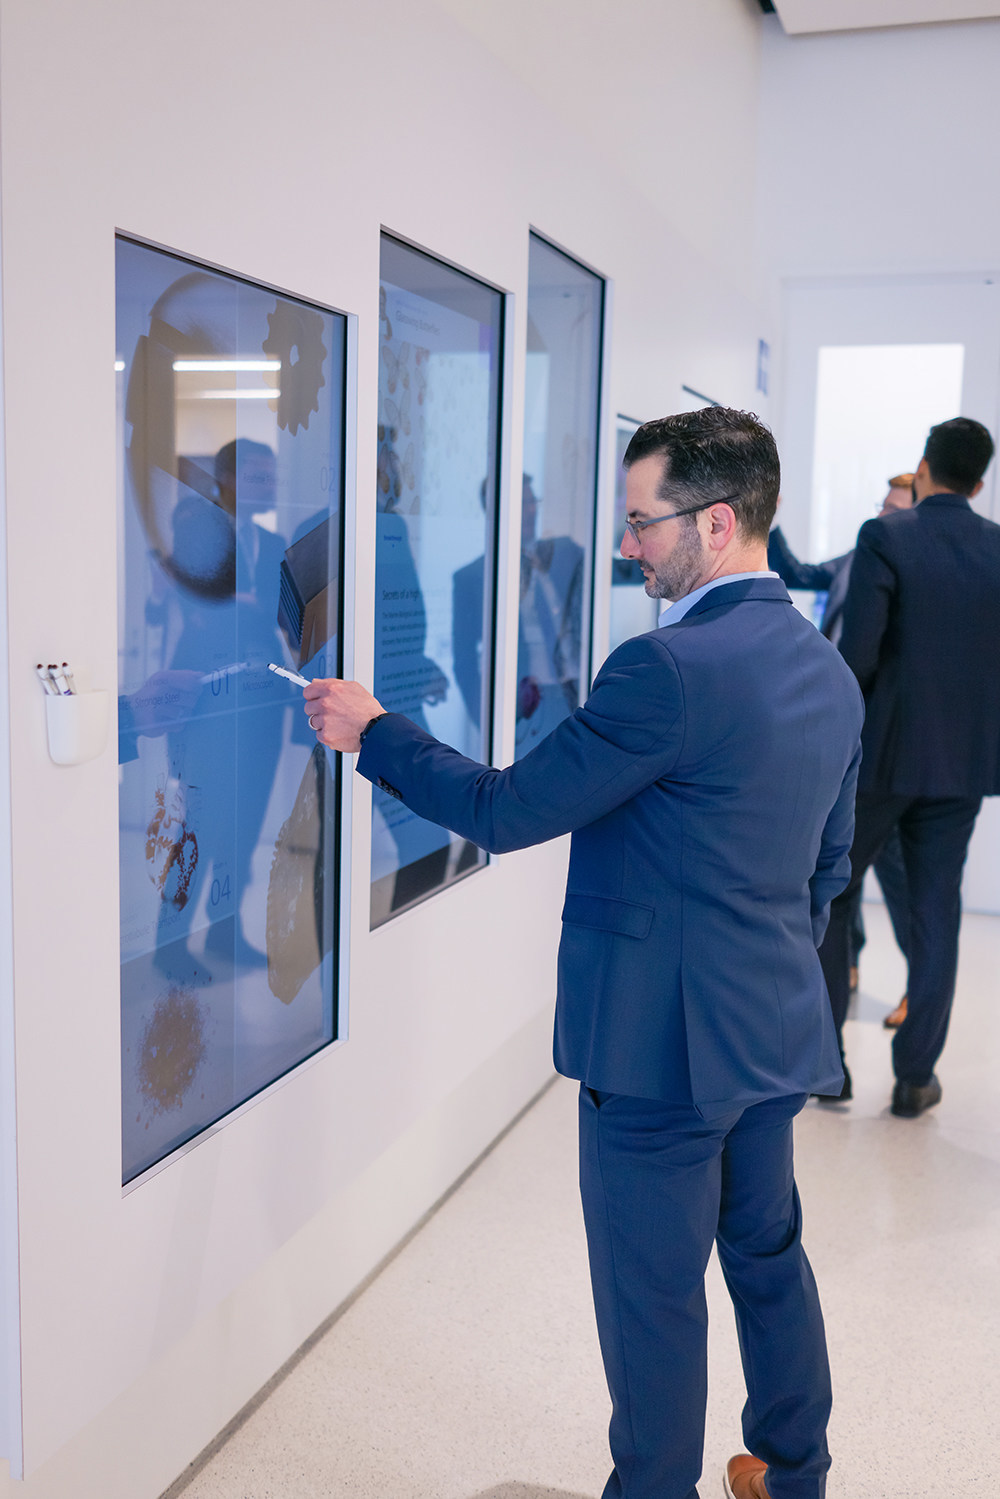 ZEISS Microscopy Showcases New Interactive Display Wall at Microscopy and Microanalysis (M&M) 2022 Conference